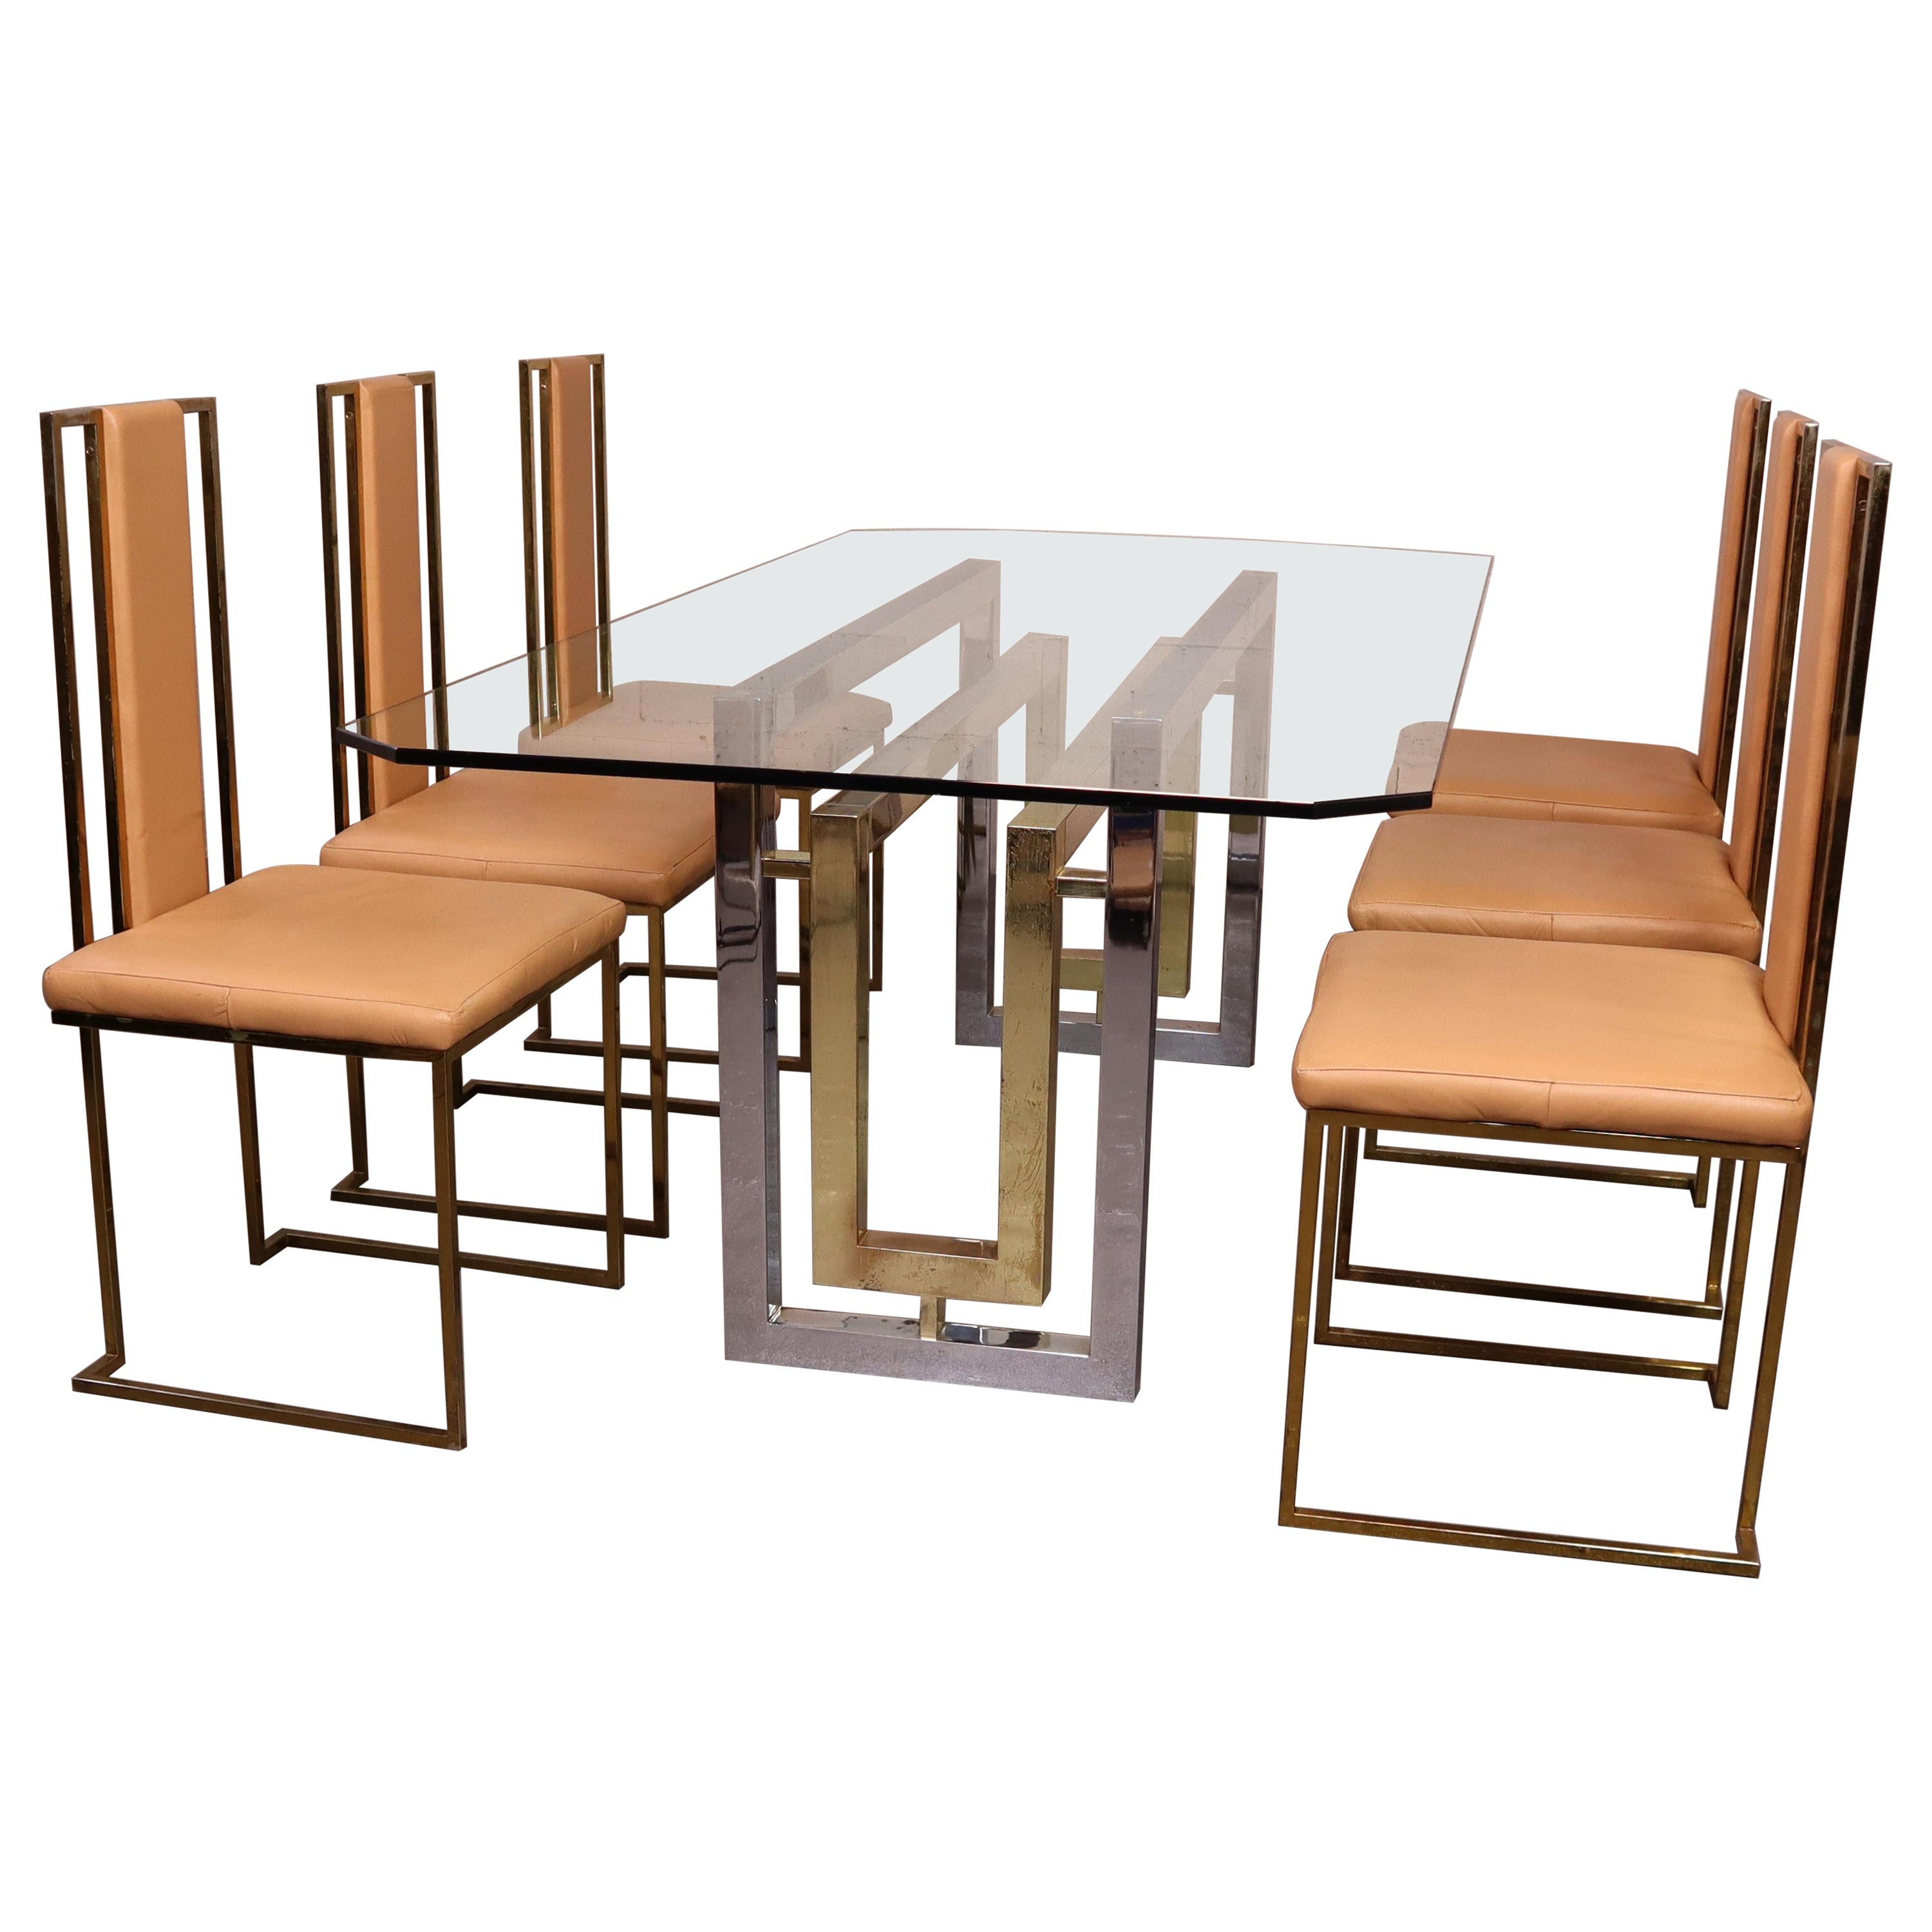 Italian leather, brass and glass dining set by Renato Zevi, 1970's For Sale